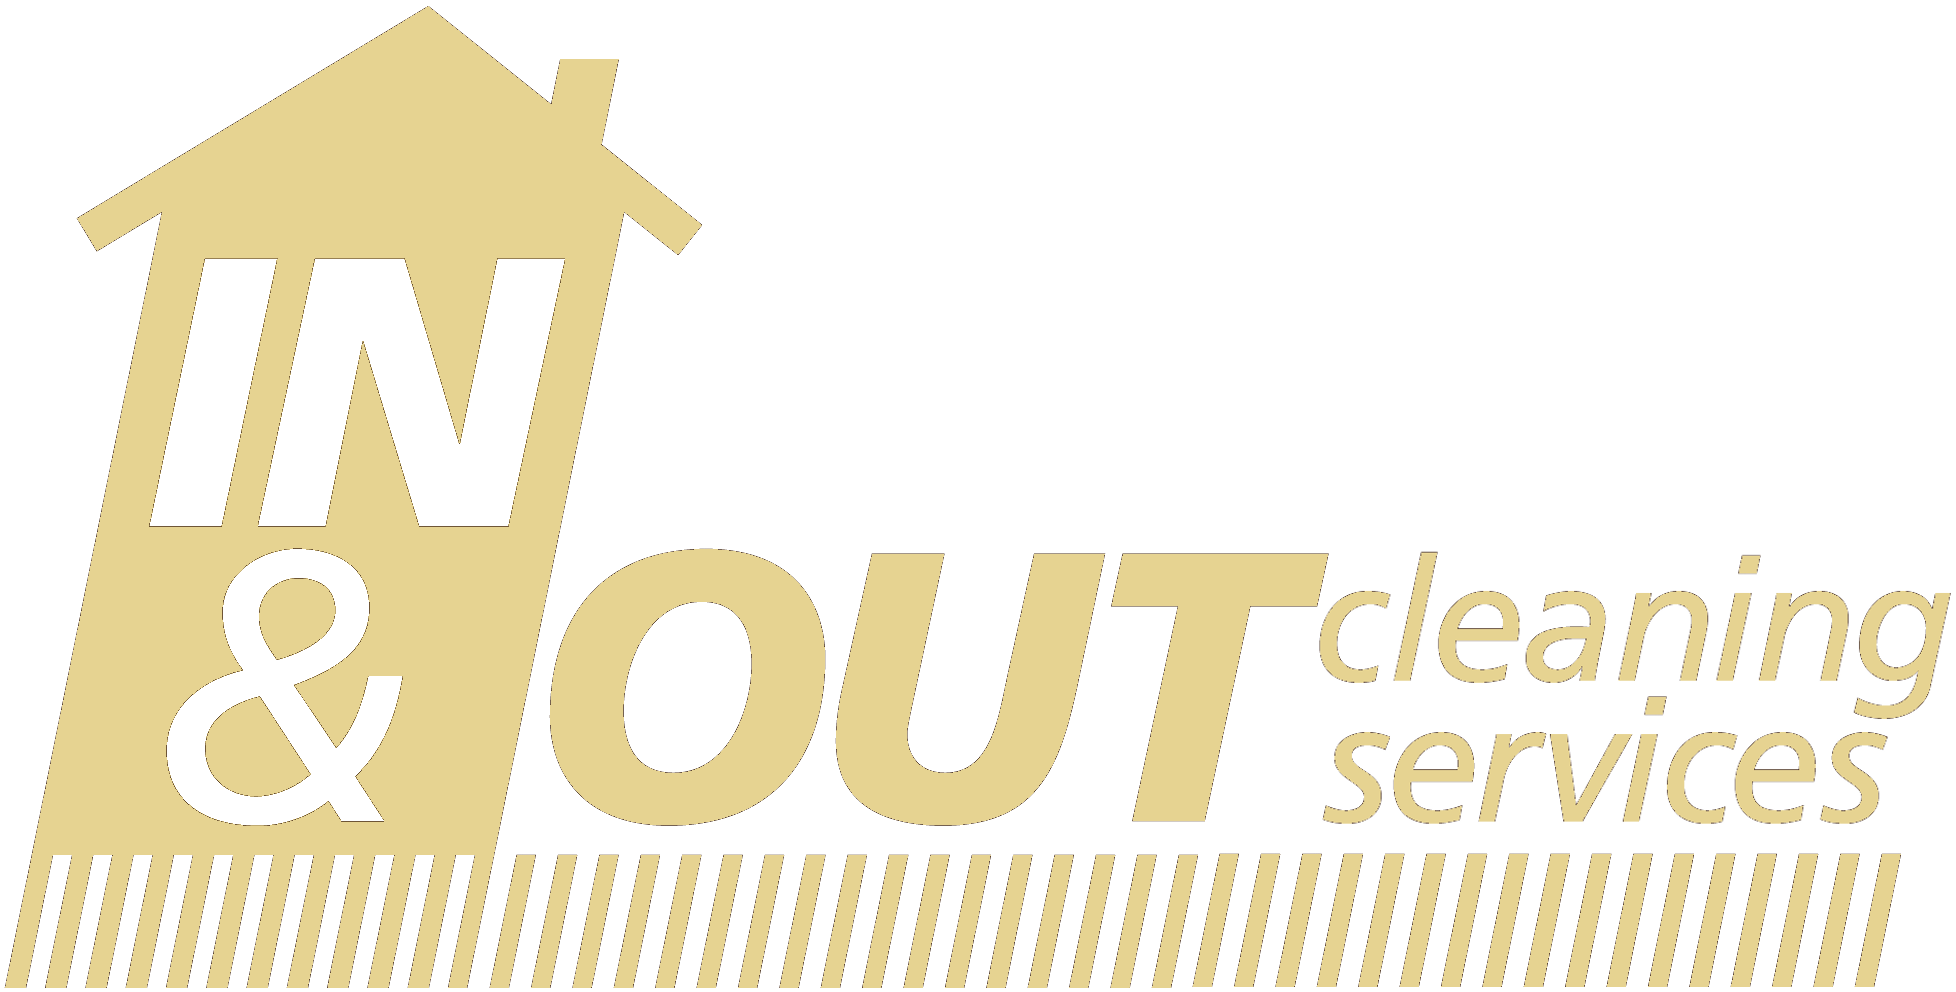 In & Out Cleaning Services